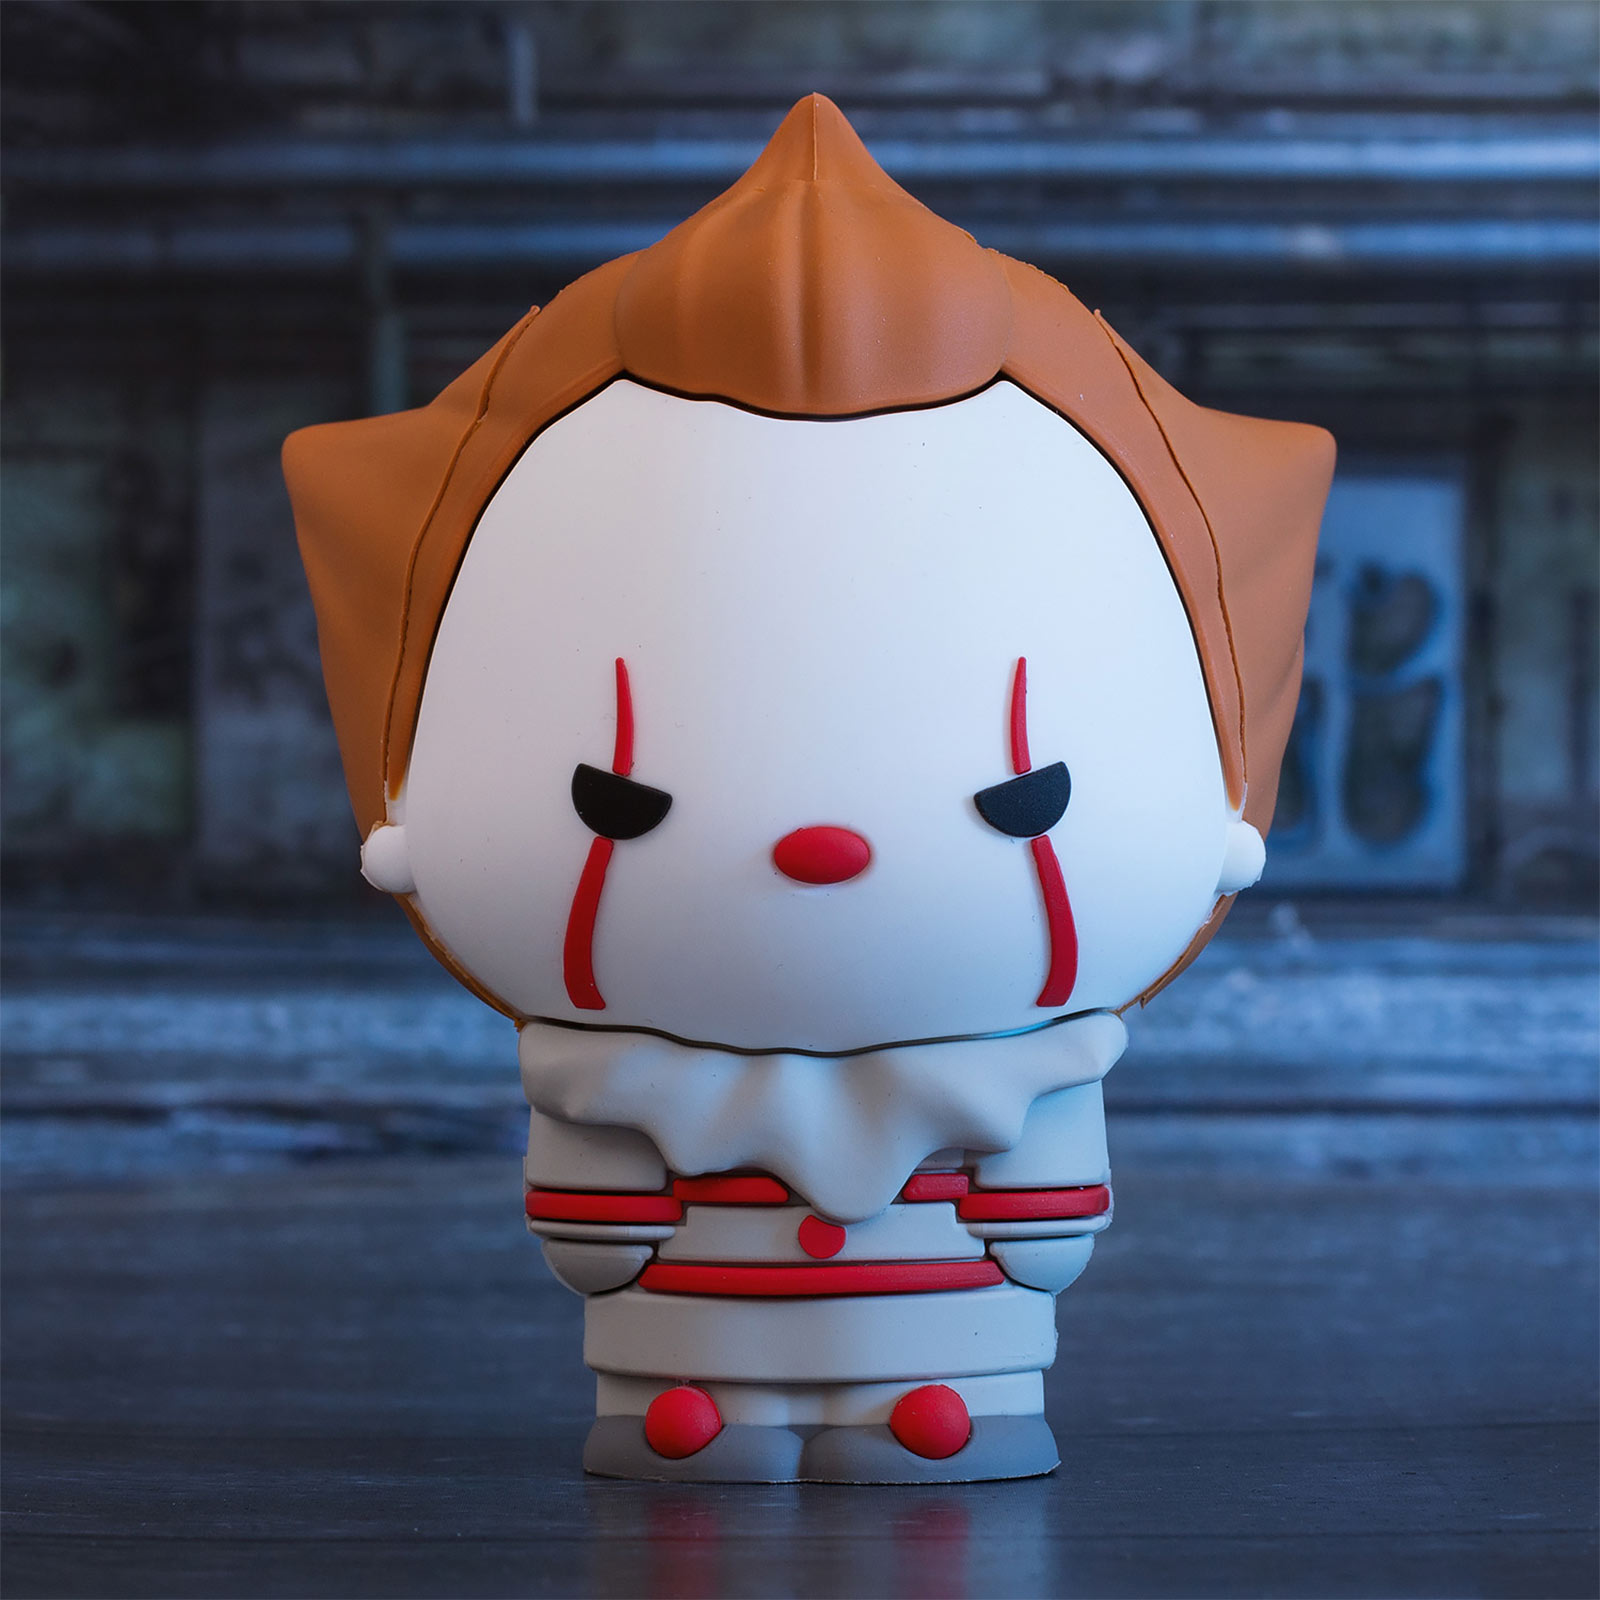 Stephen King's IT - Pennywise Power Bank 2500mAh